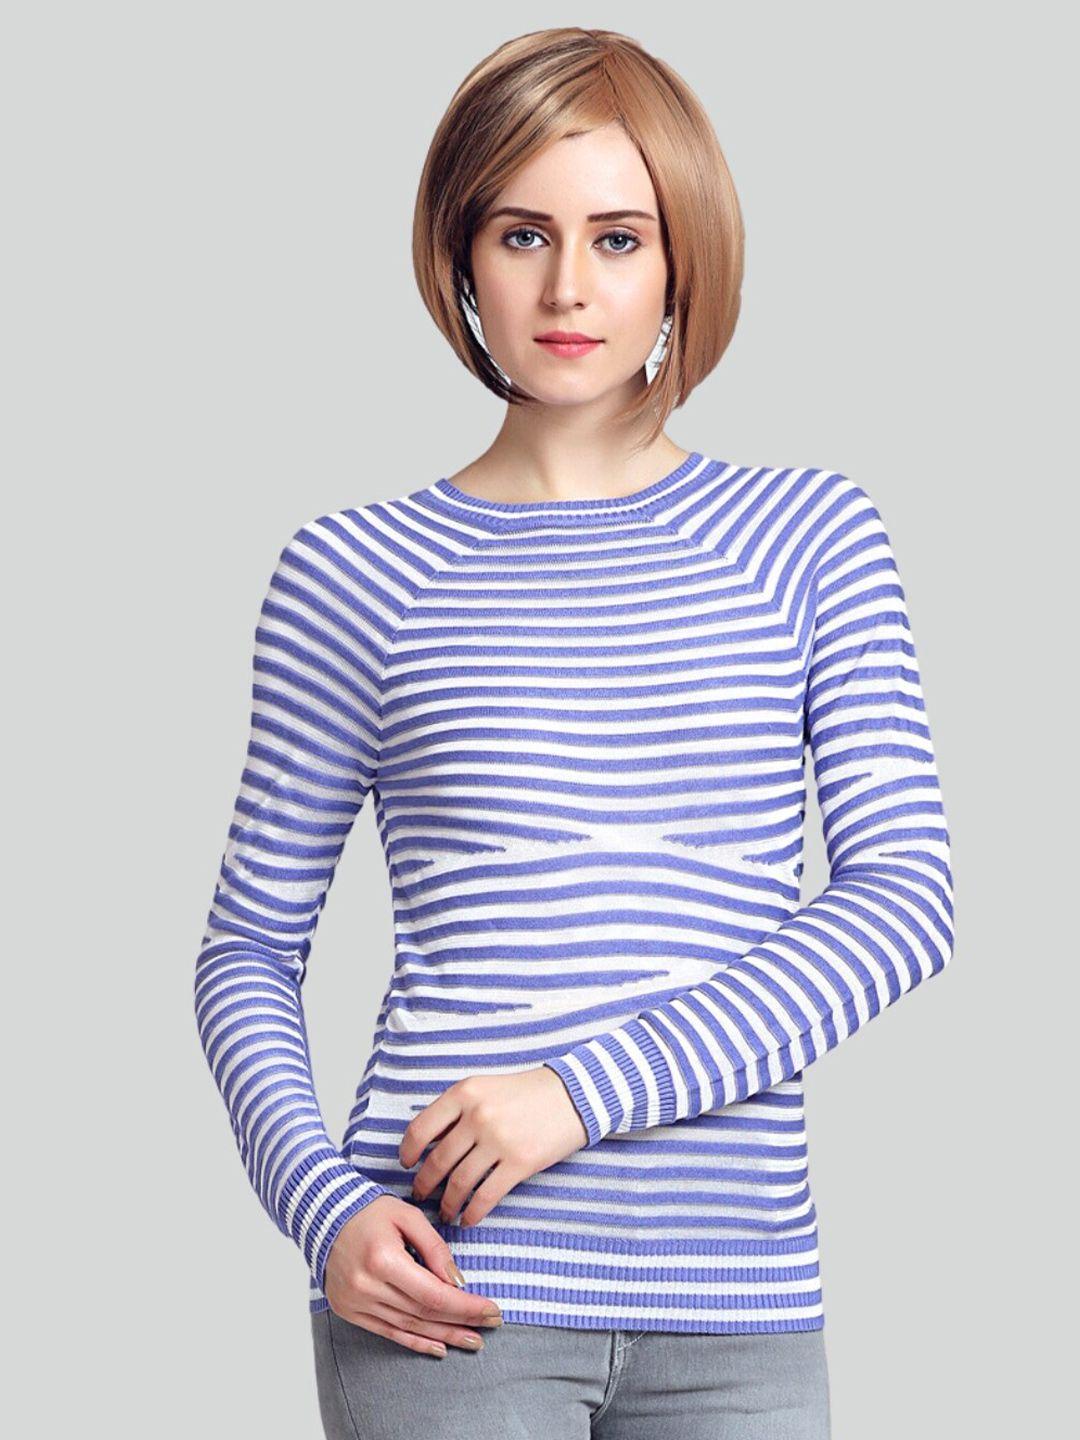 moda-elementi-striped-long-sleeves-pullover-sweater